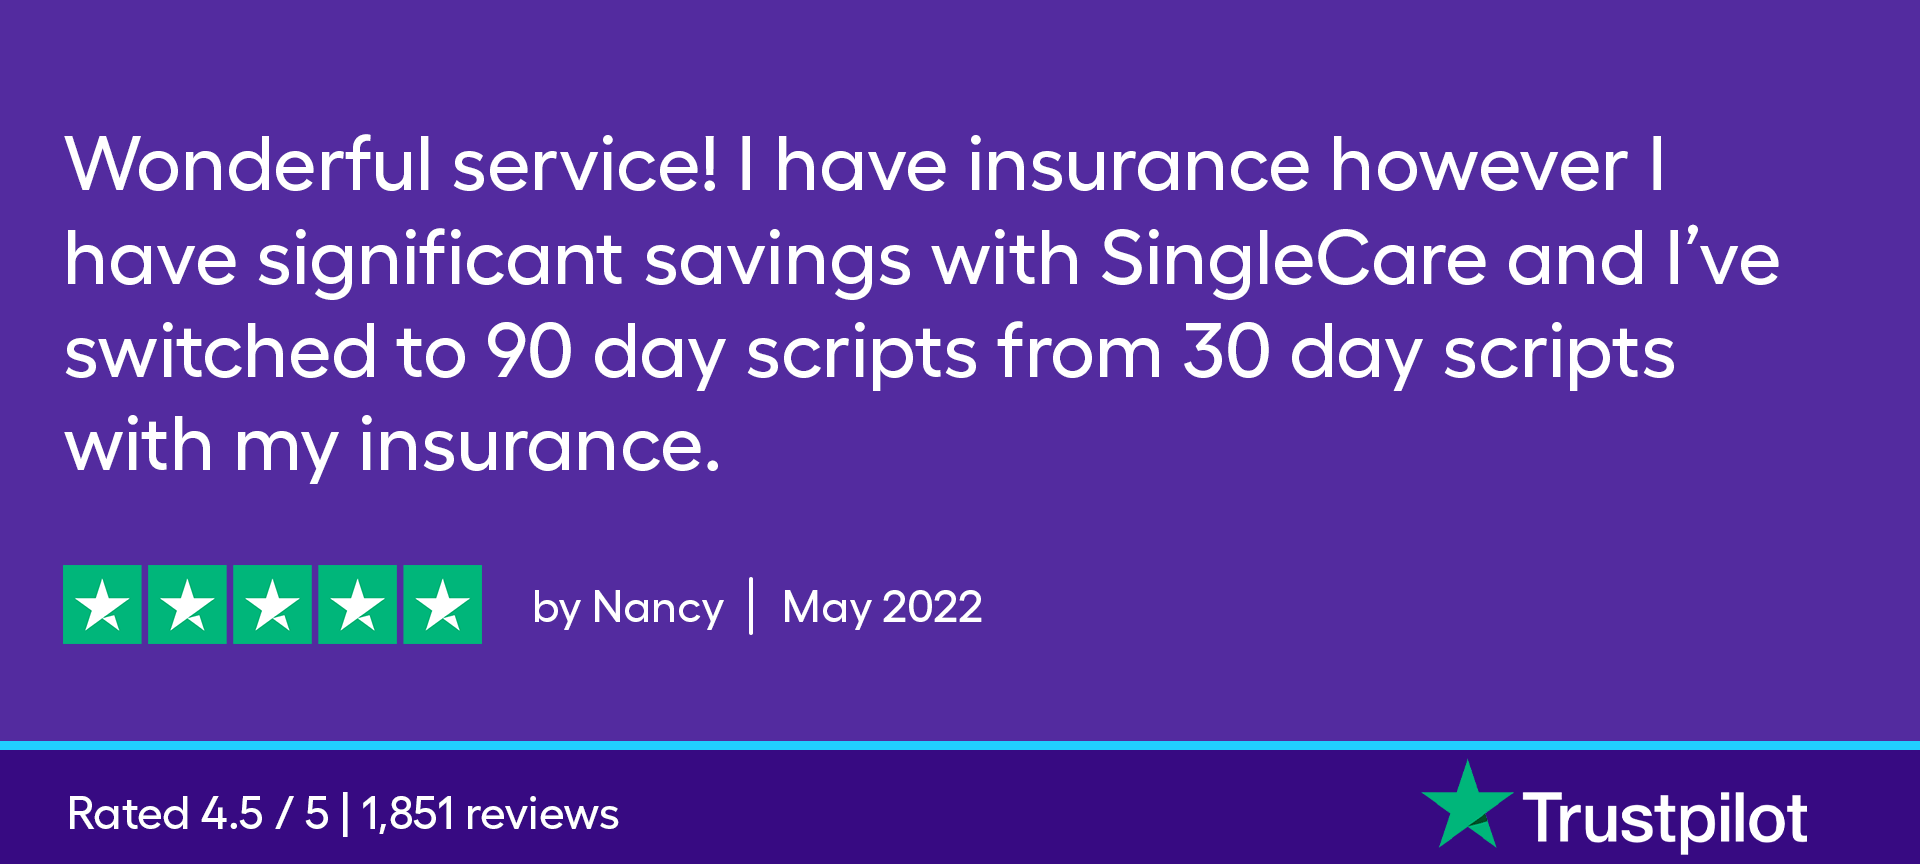 Wonderful service! I have insurance however I have significant savings with SingleCare and I’ve switched to 90 day scripts from 30 day scripts with my insurance. 